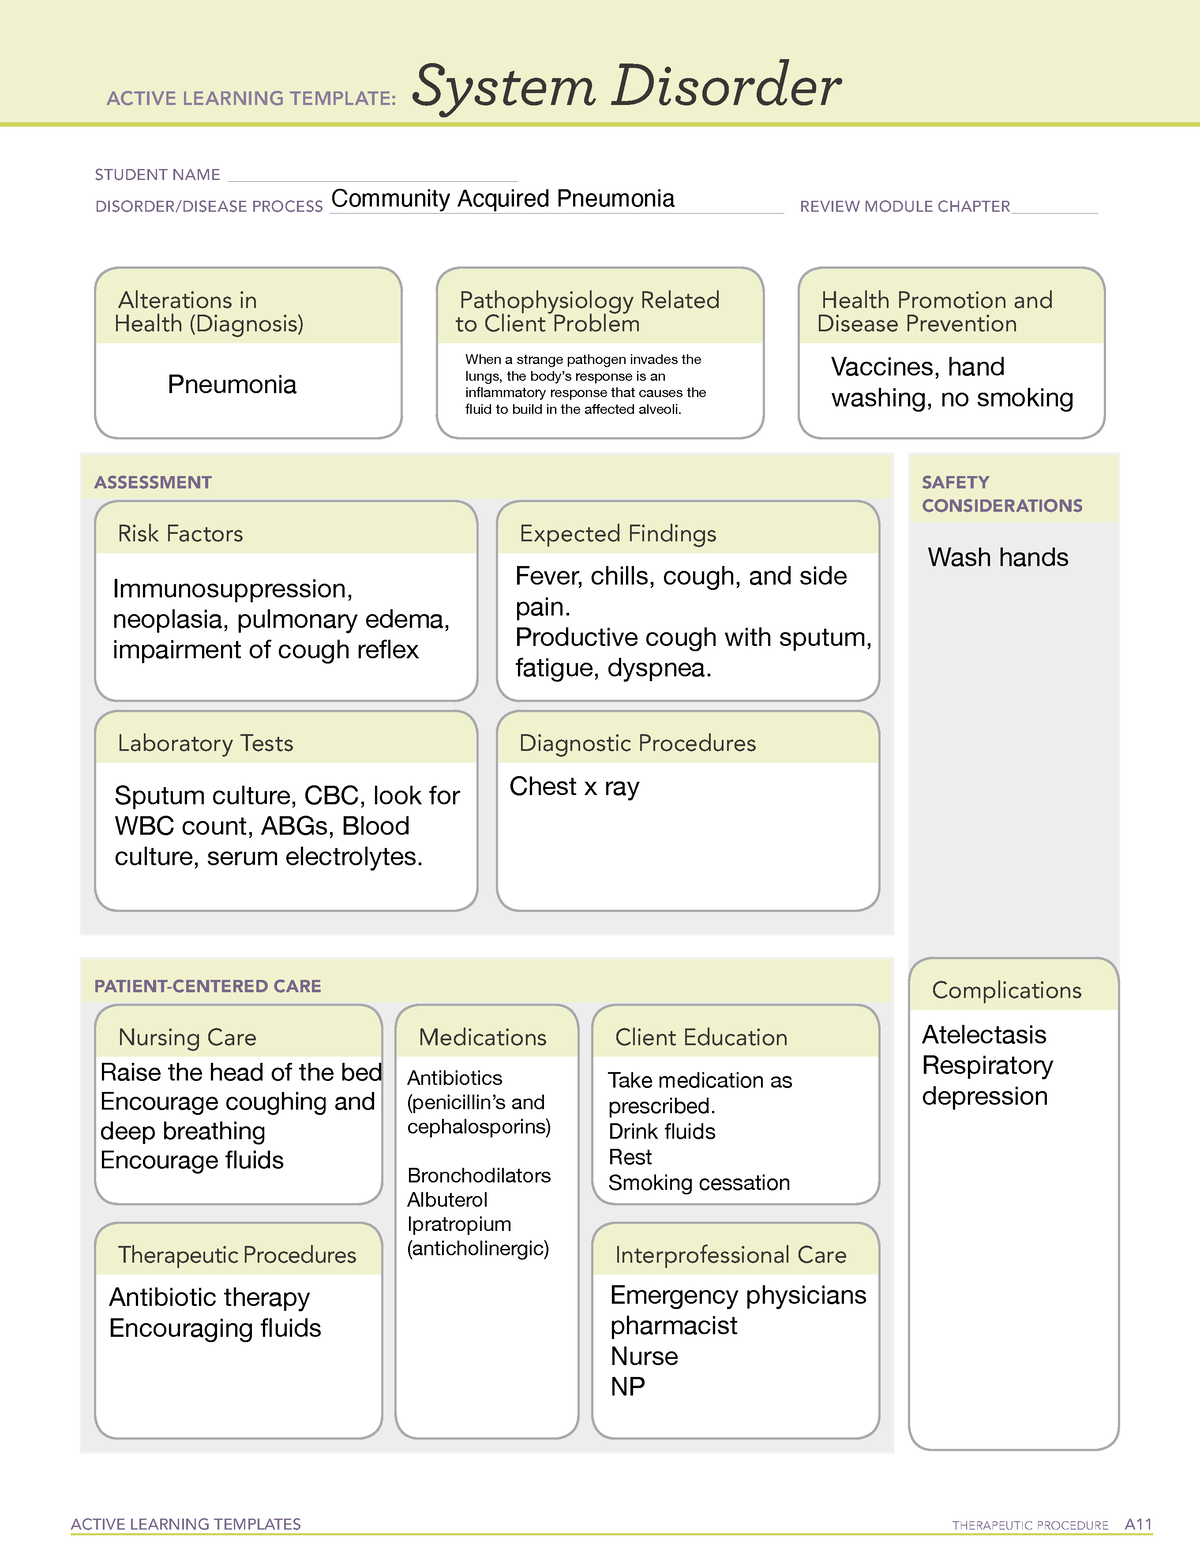 CAP - study material - ACTIVE LEARNING TEMPLATES THERAPEUTIC PROCEDURE ...